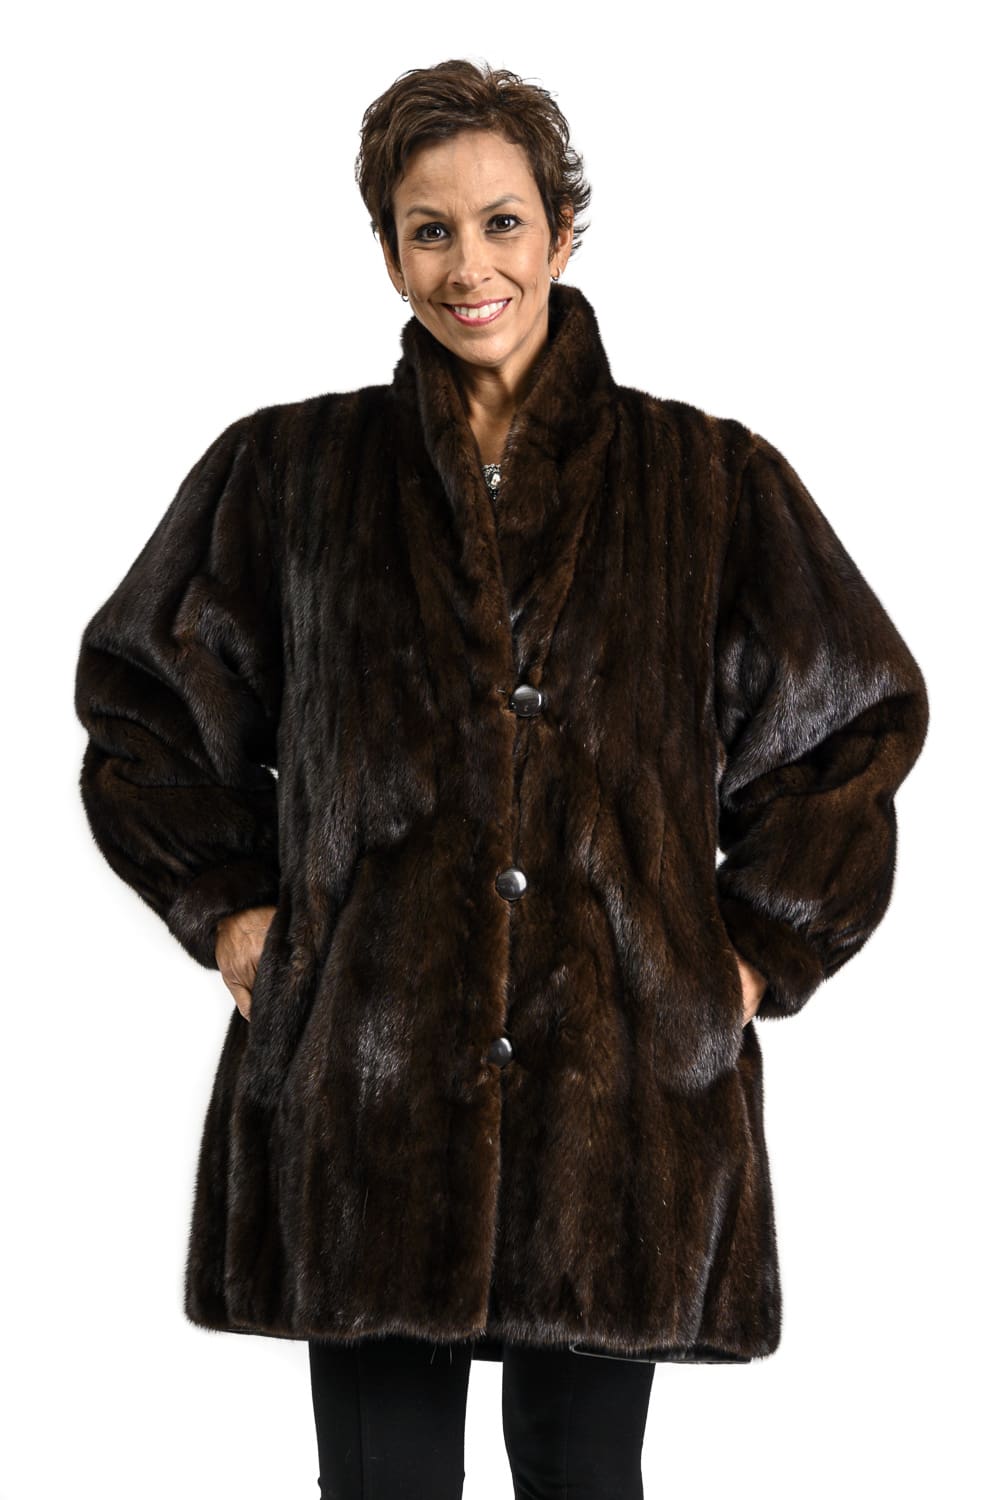 W91 2 Reversible Mink Fur to Lamb Leather Jacket